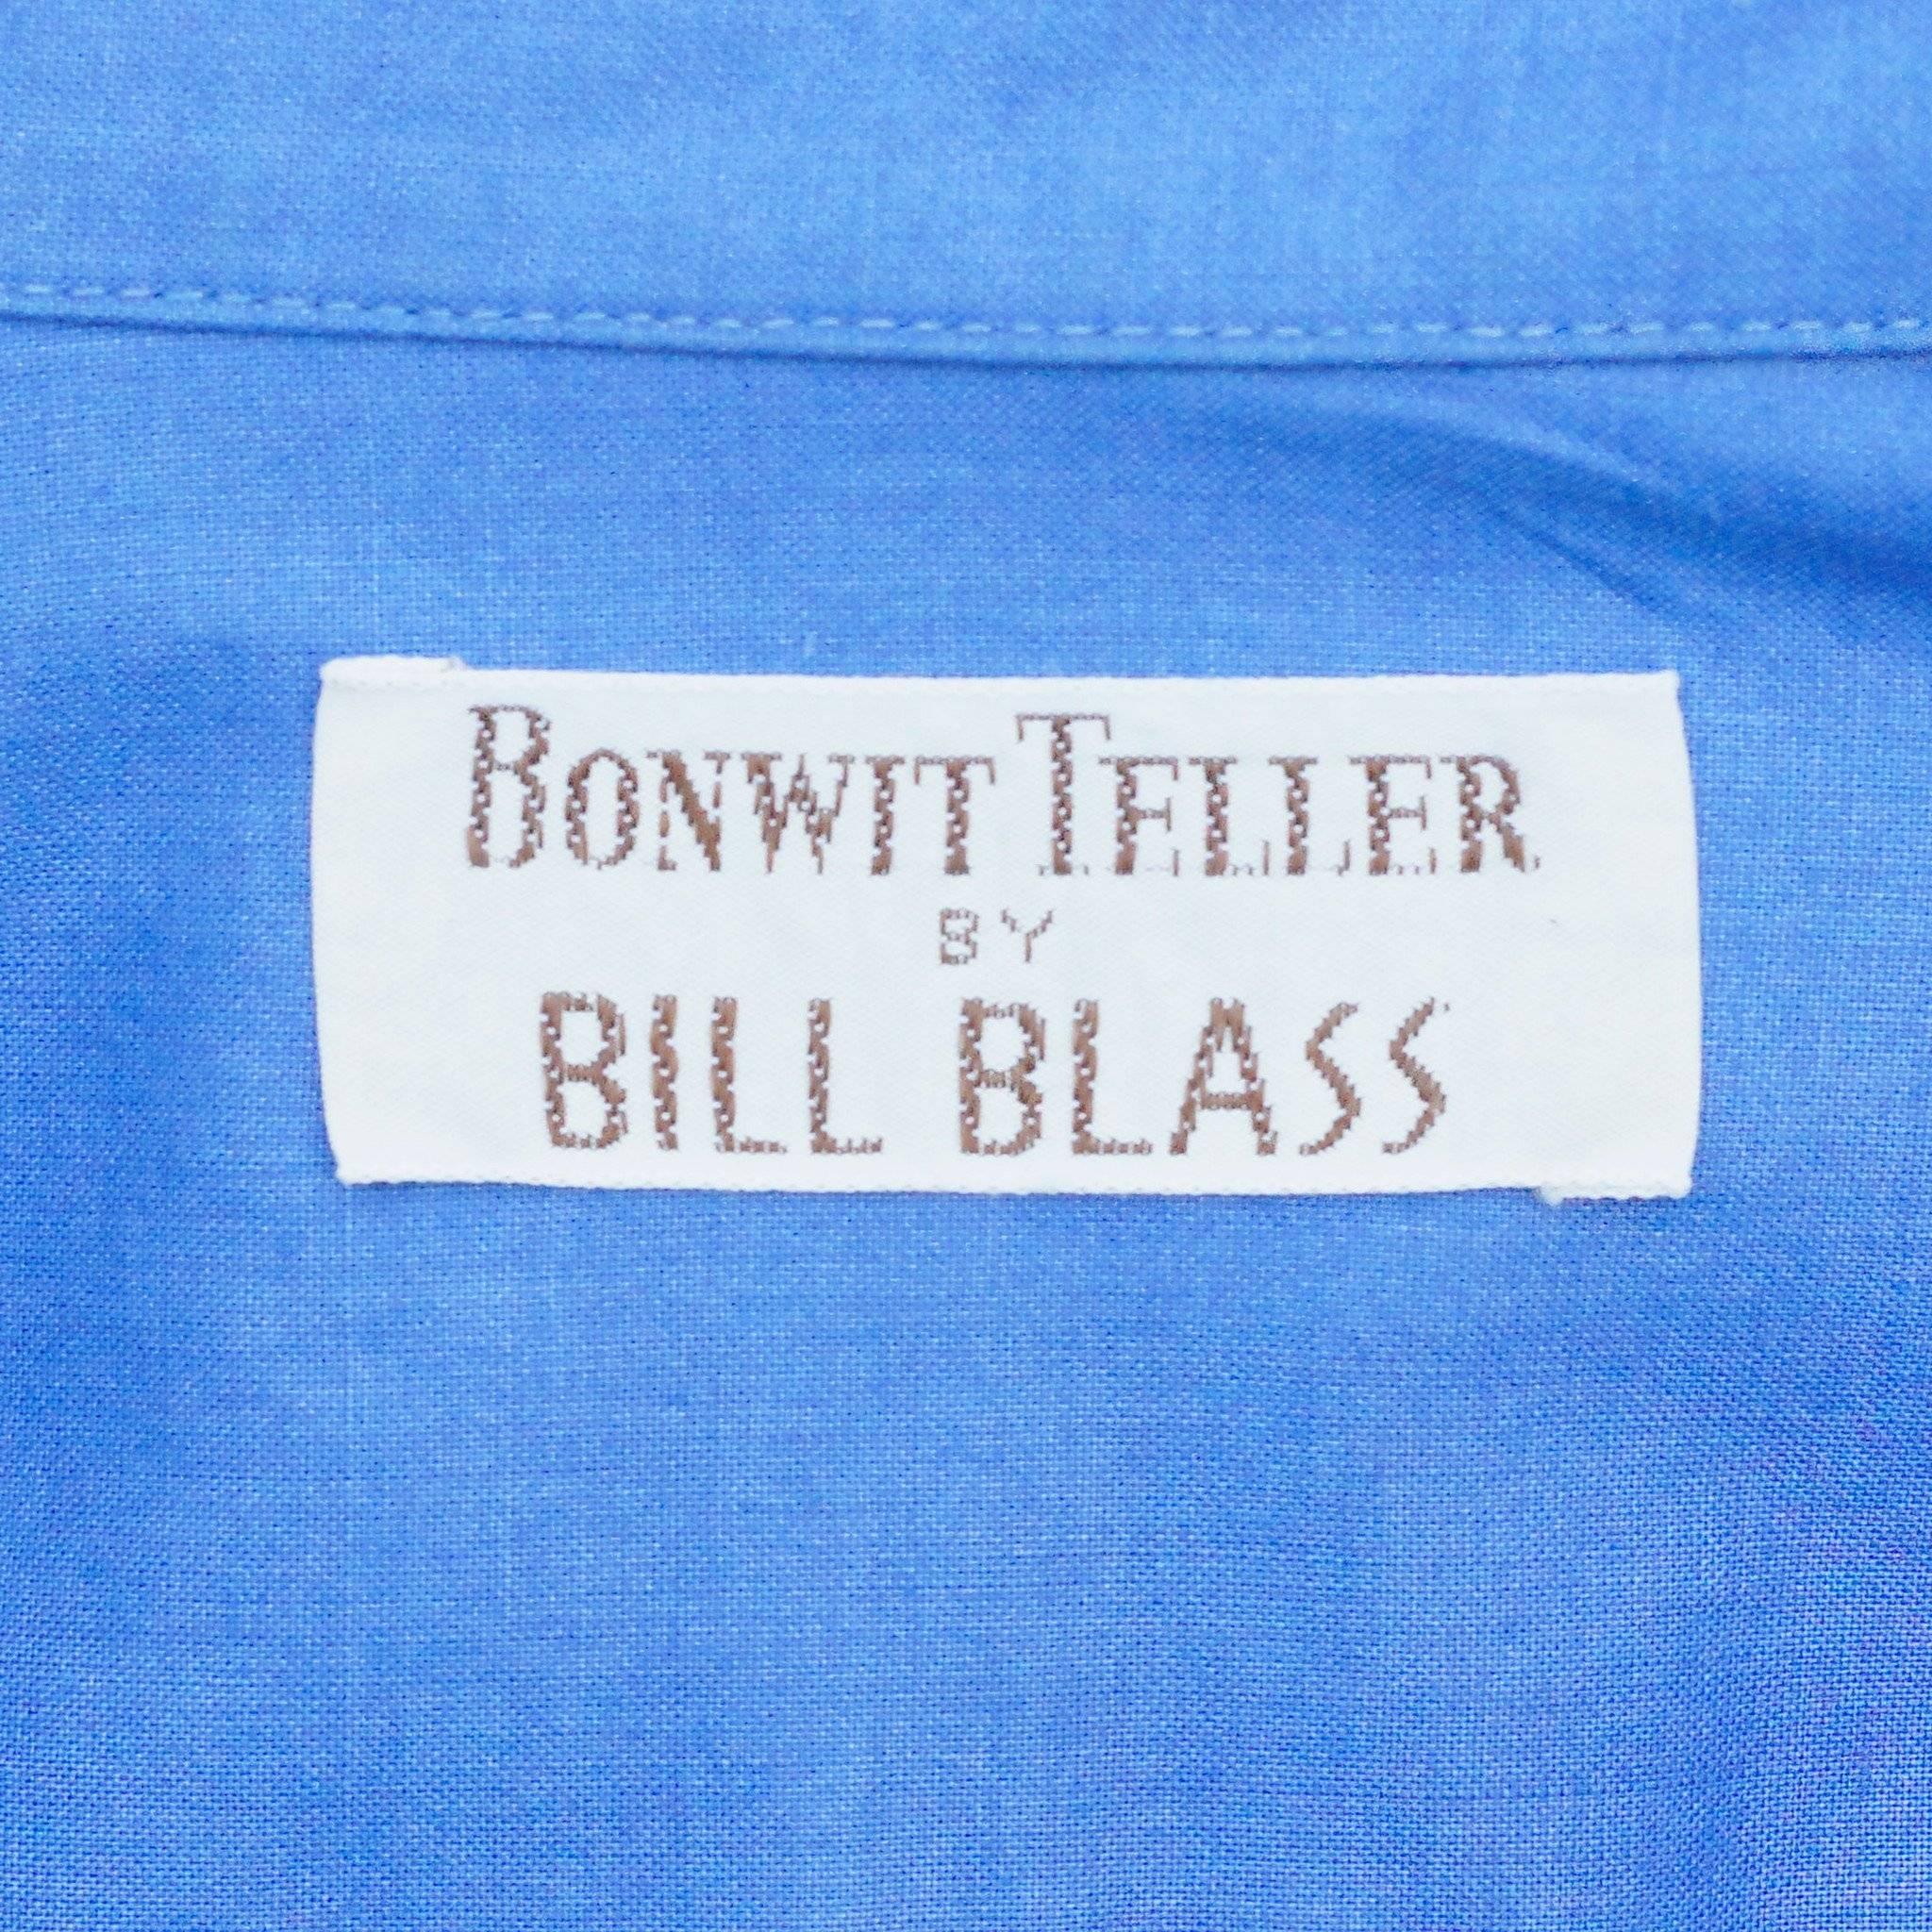 Bill Blass For Bonwit Teller Safari Shirt Jacket In Good Condition For Sale In Los Angeles, CA